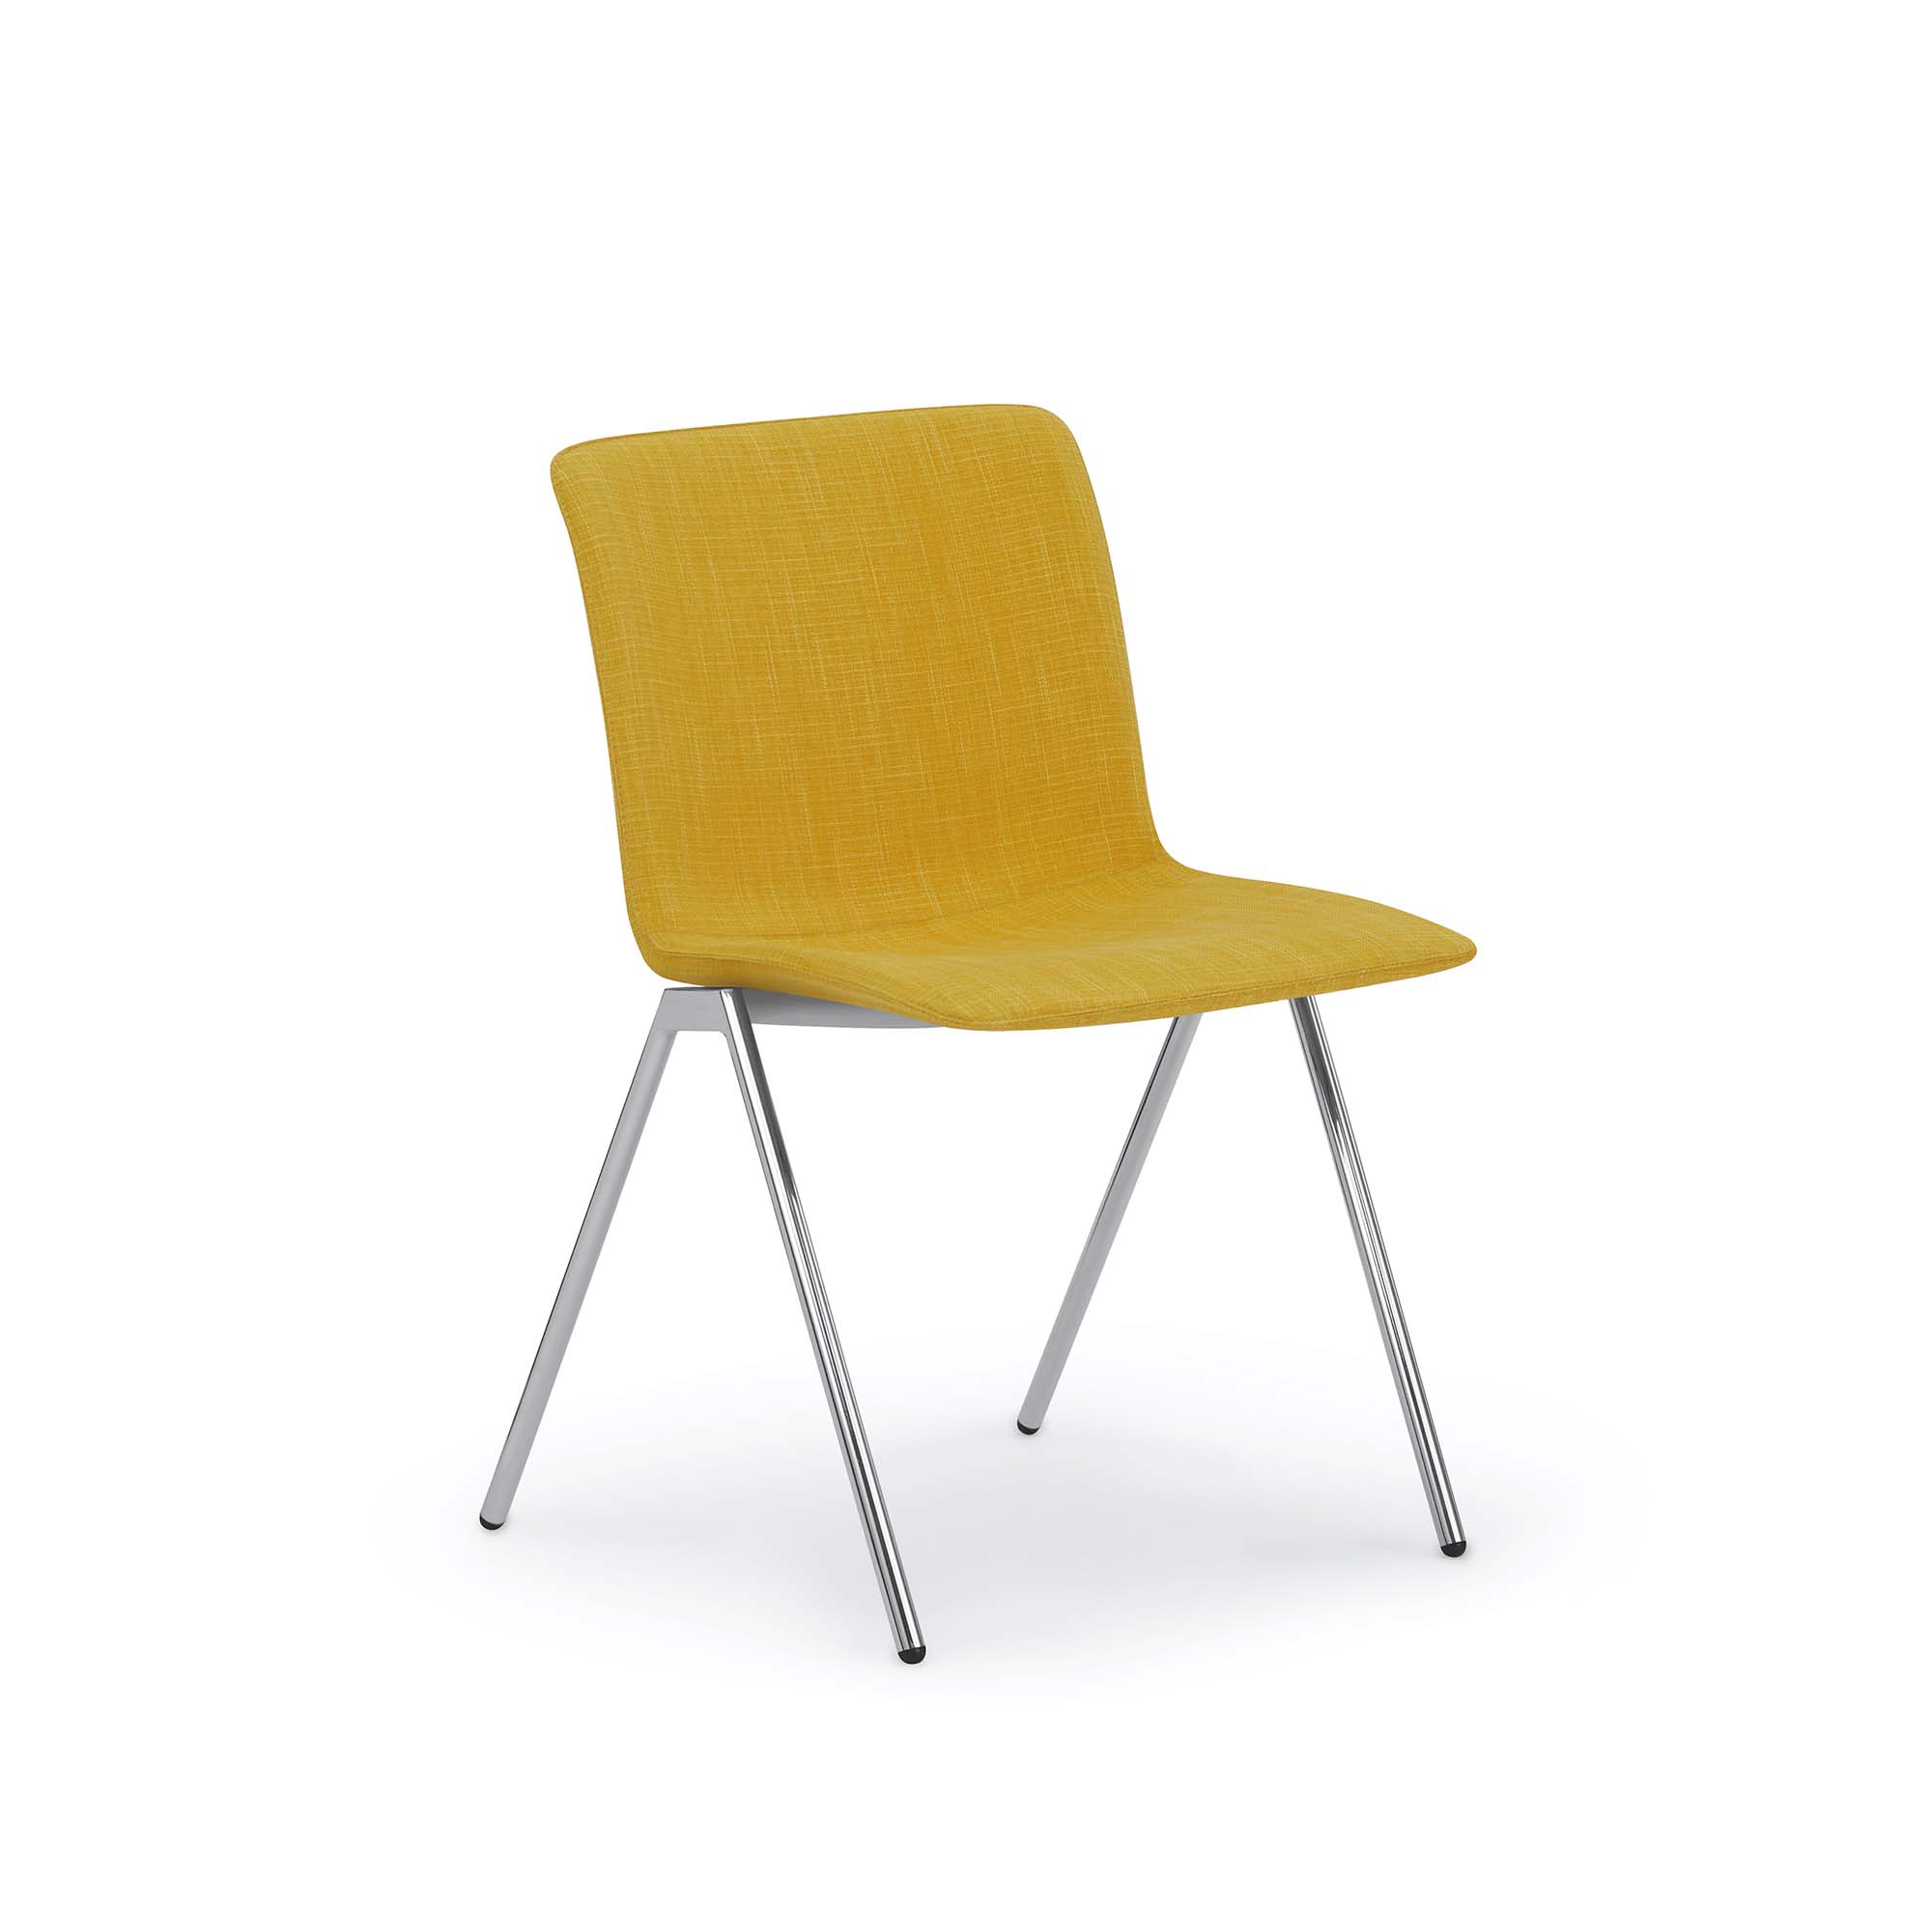 Kitsy Guest Chair, A-Frame Base